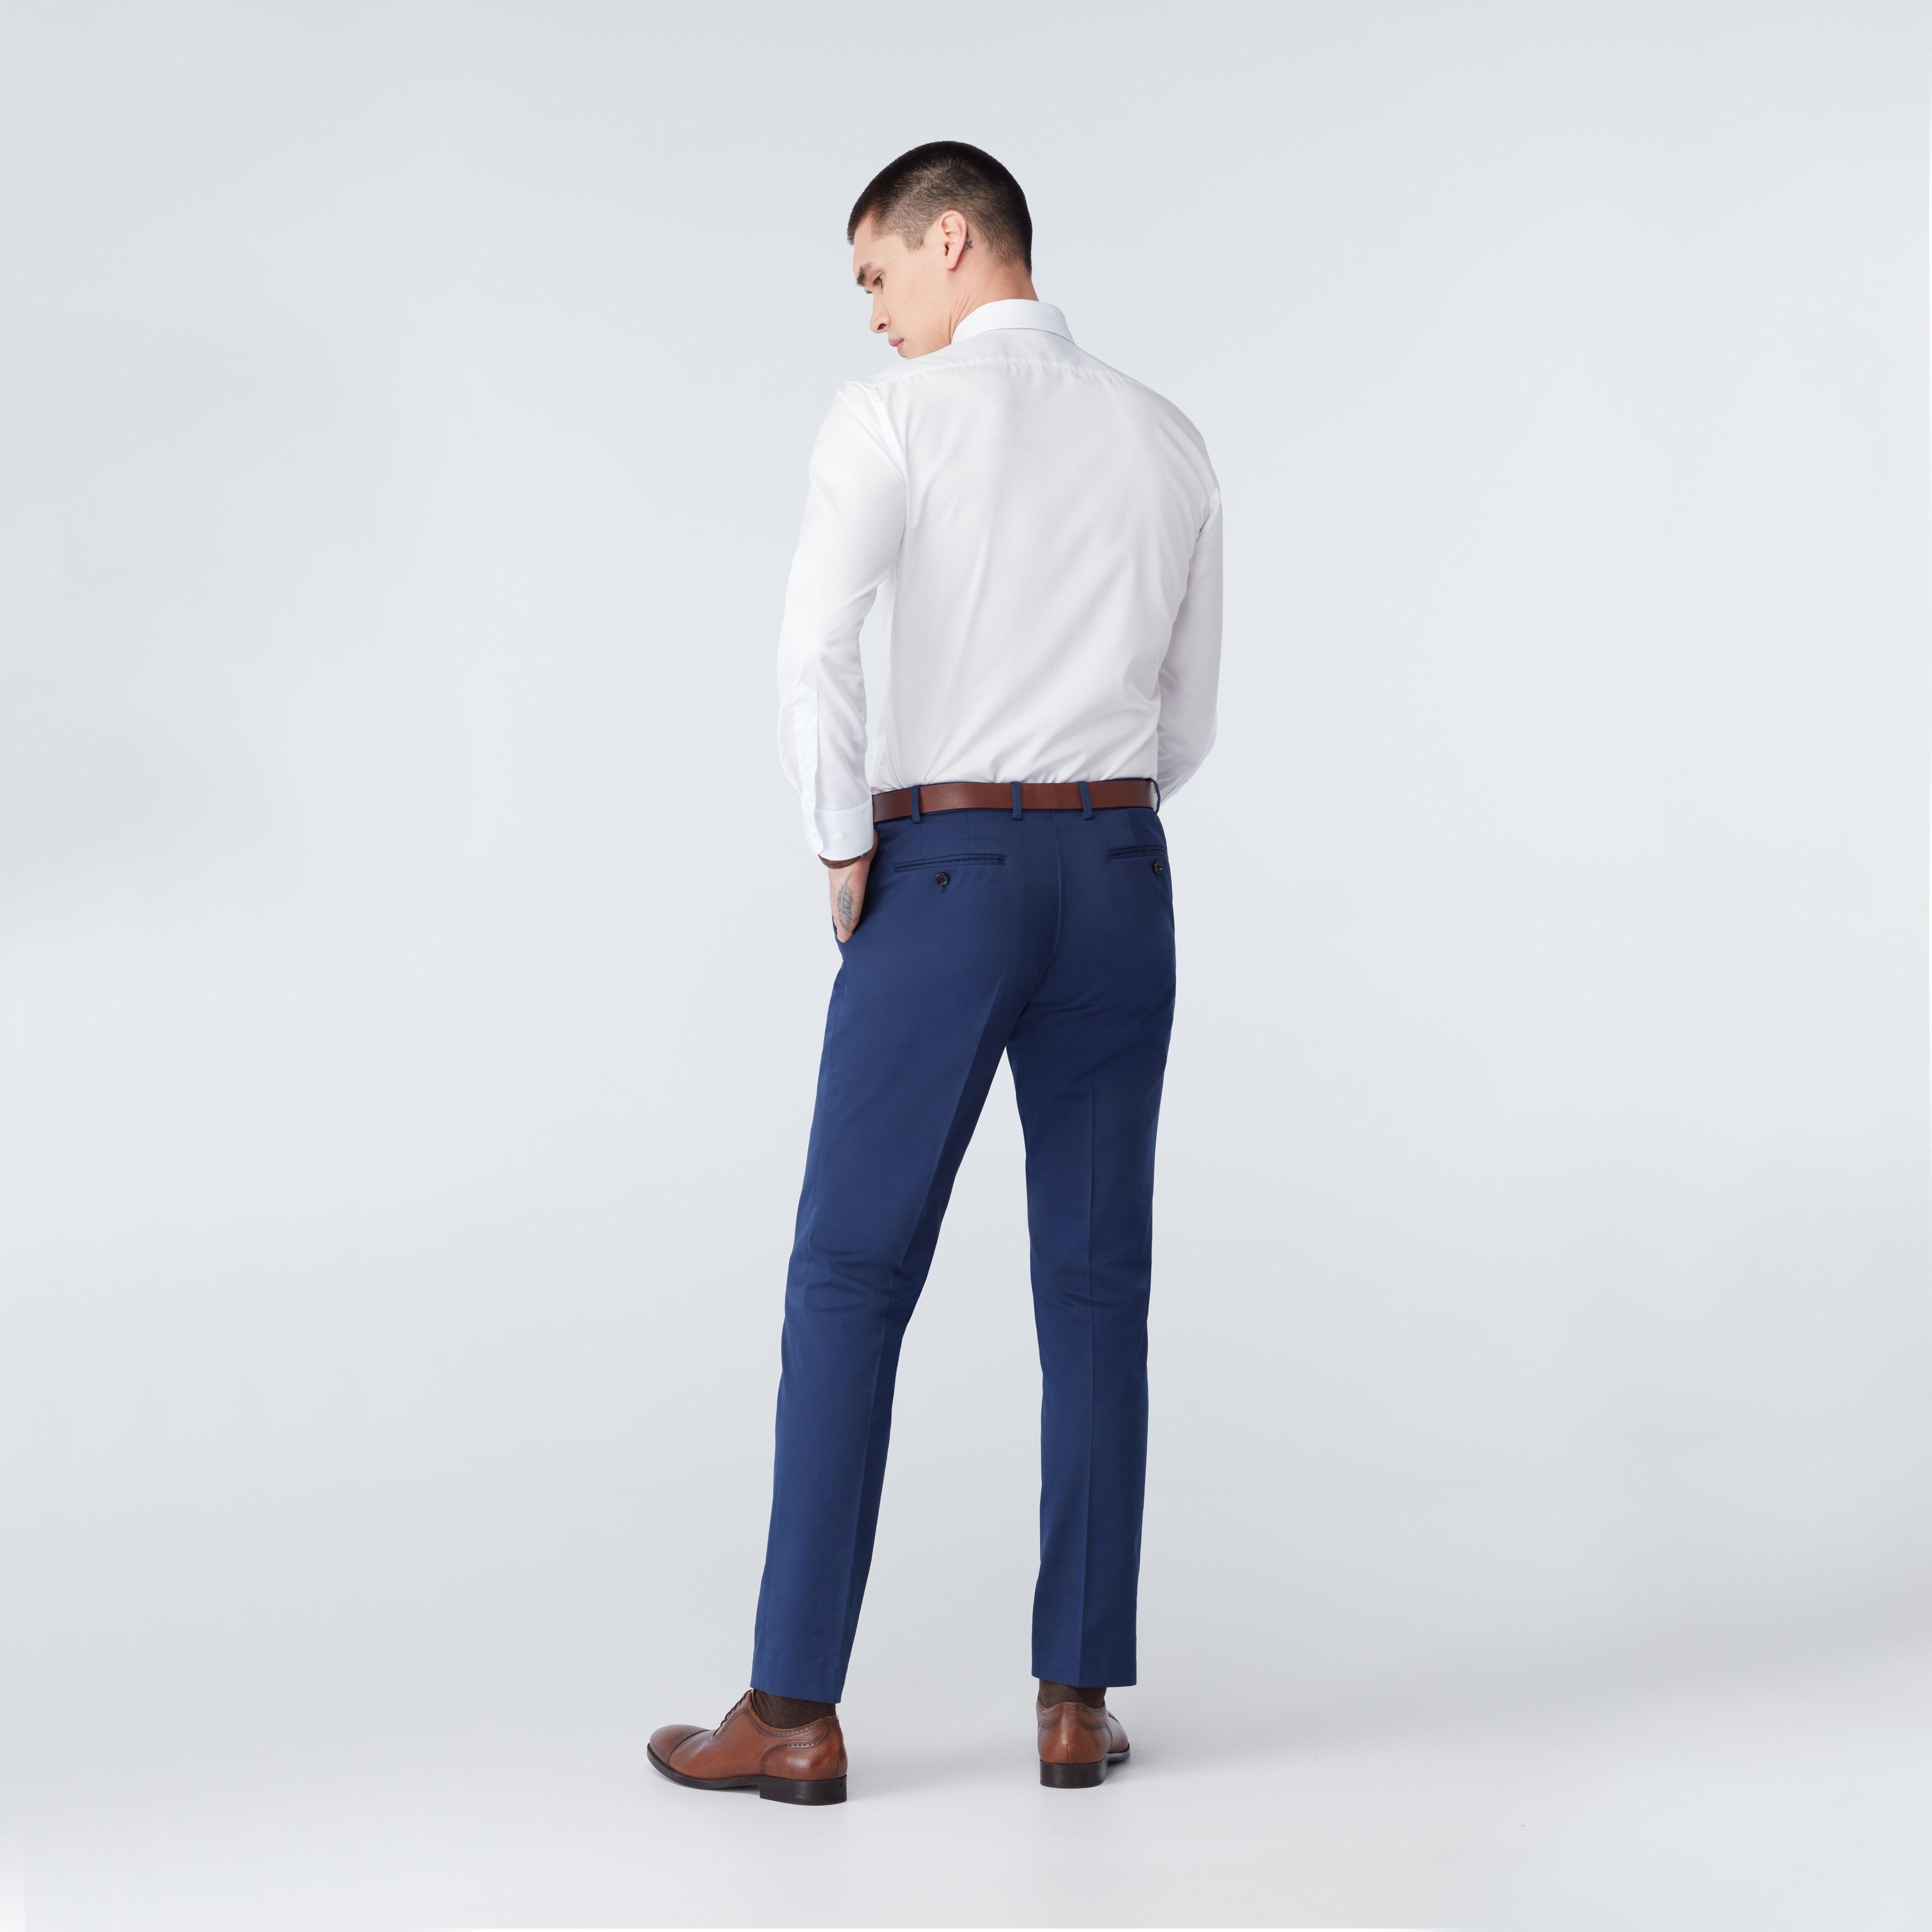 Custom Suits Made For You - Hartley Cotton Stretch Blue Suit | INDOCHINO